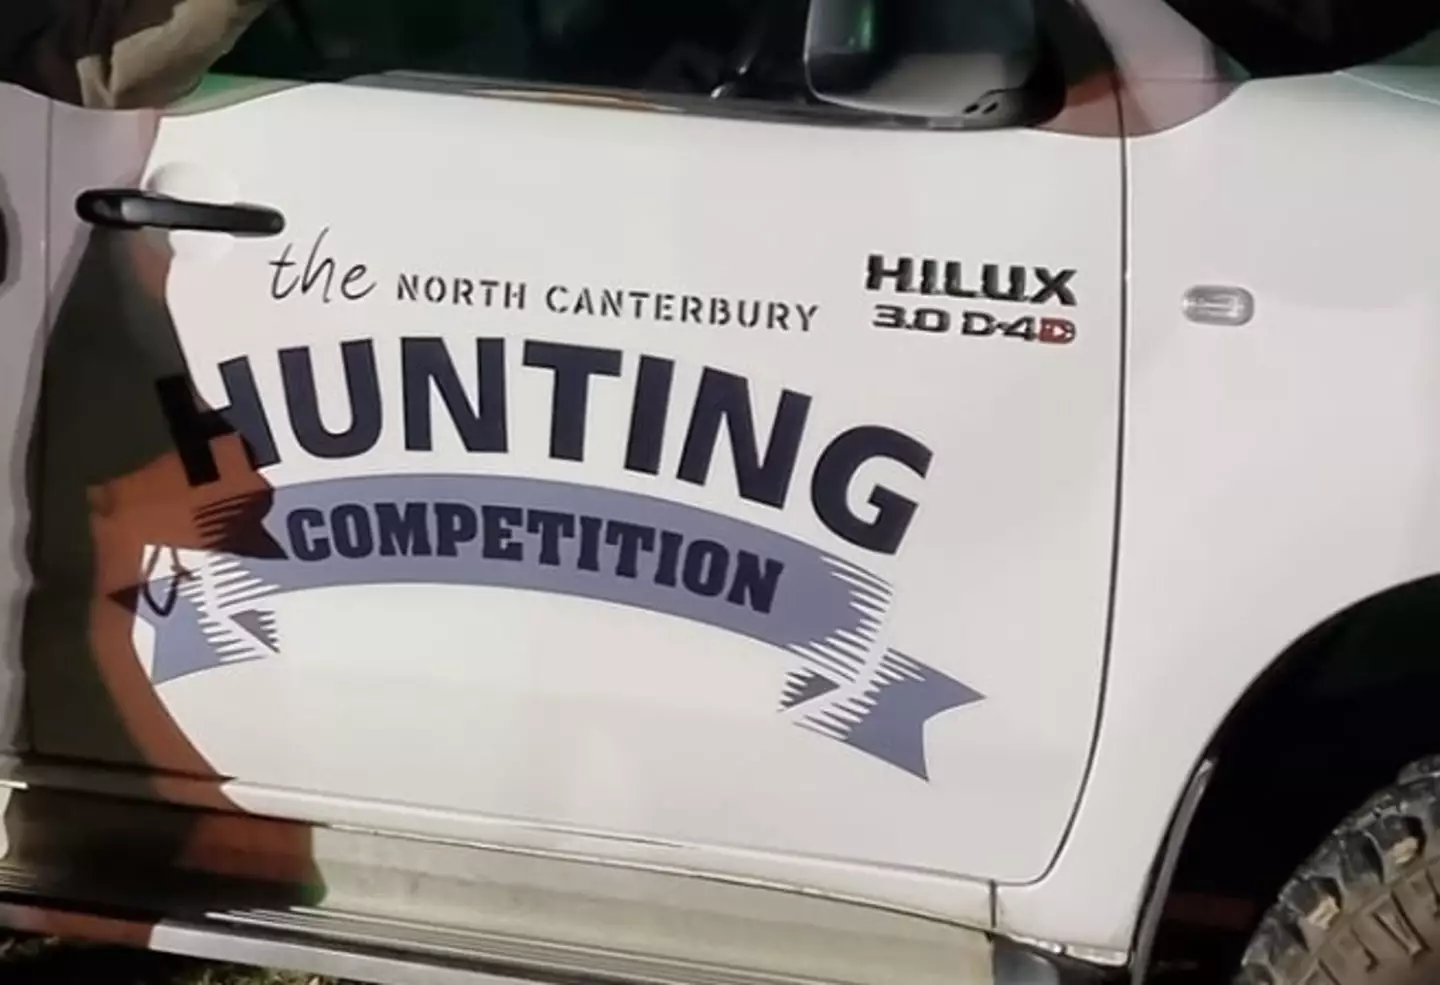 The competition has rules to prevent pet cats being caught. (Facebook/The North Canterbury Hunting Competition)